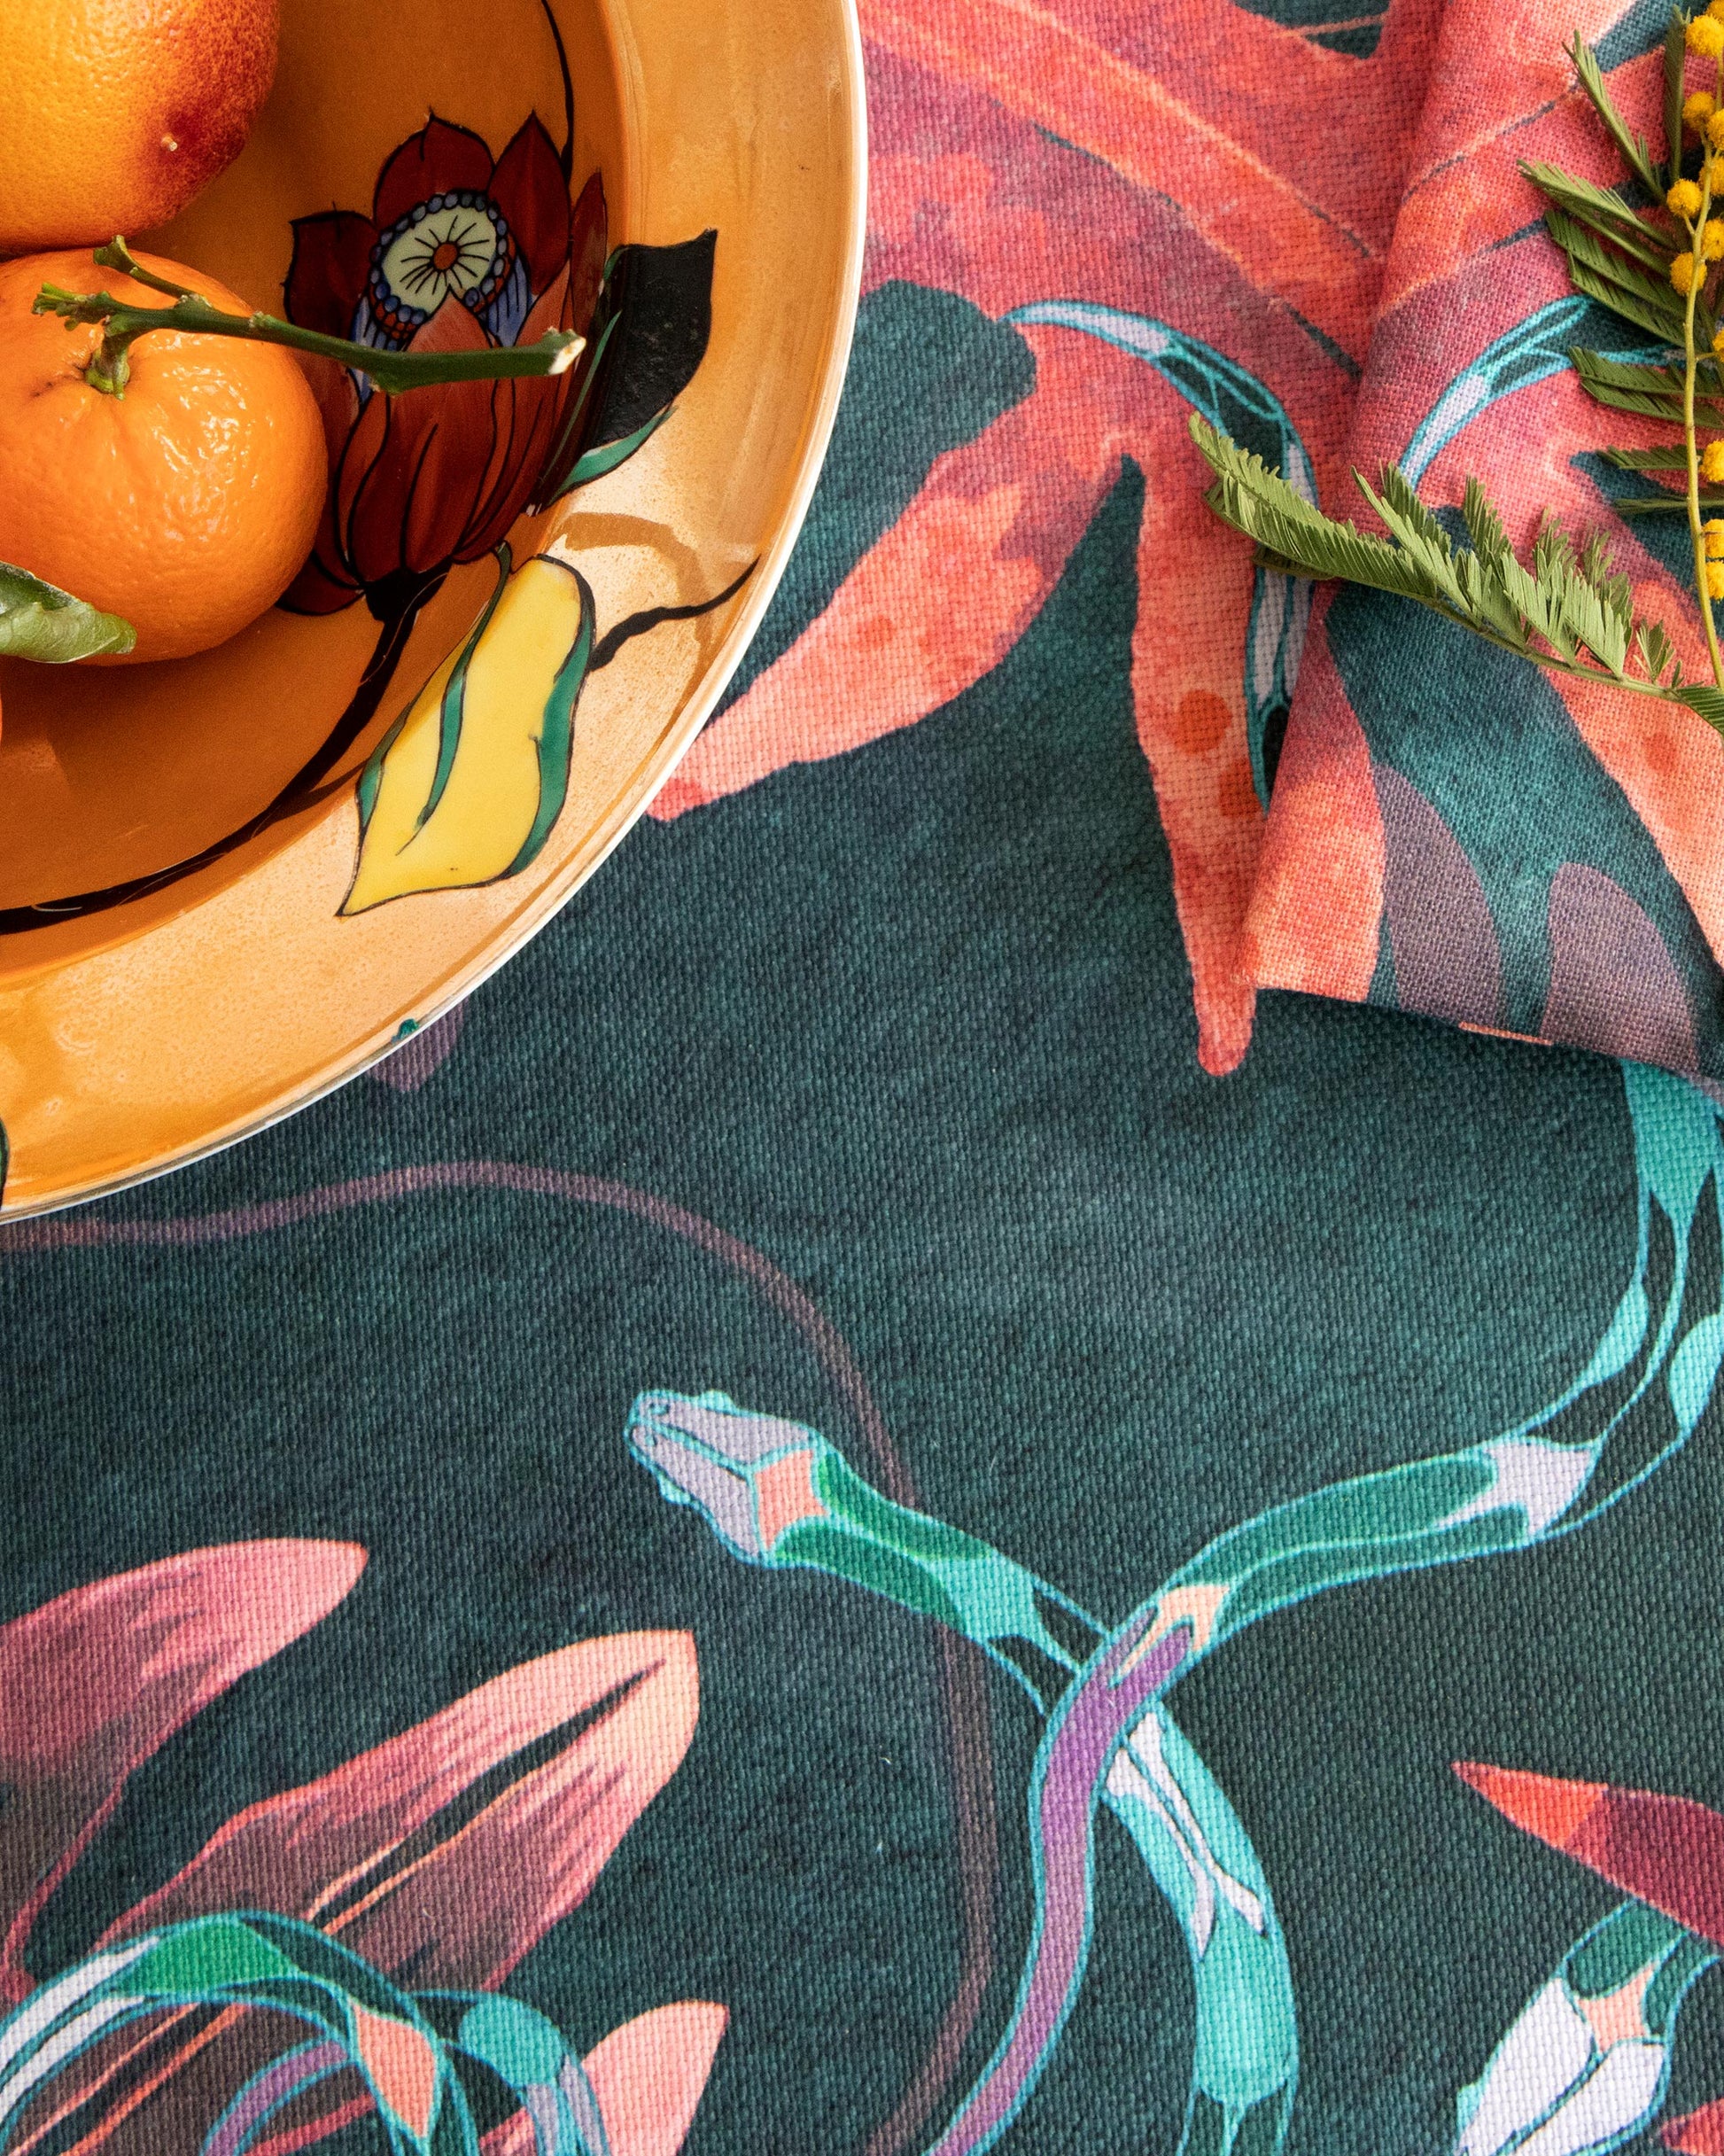 A bowl of oranges on a table with a tablecloth inspired by the Edera Fabric 12 Yards Beryl and Eskayel collaboration